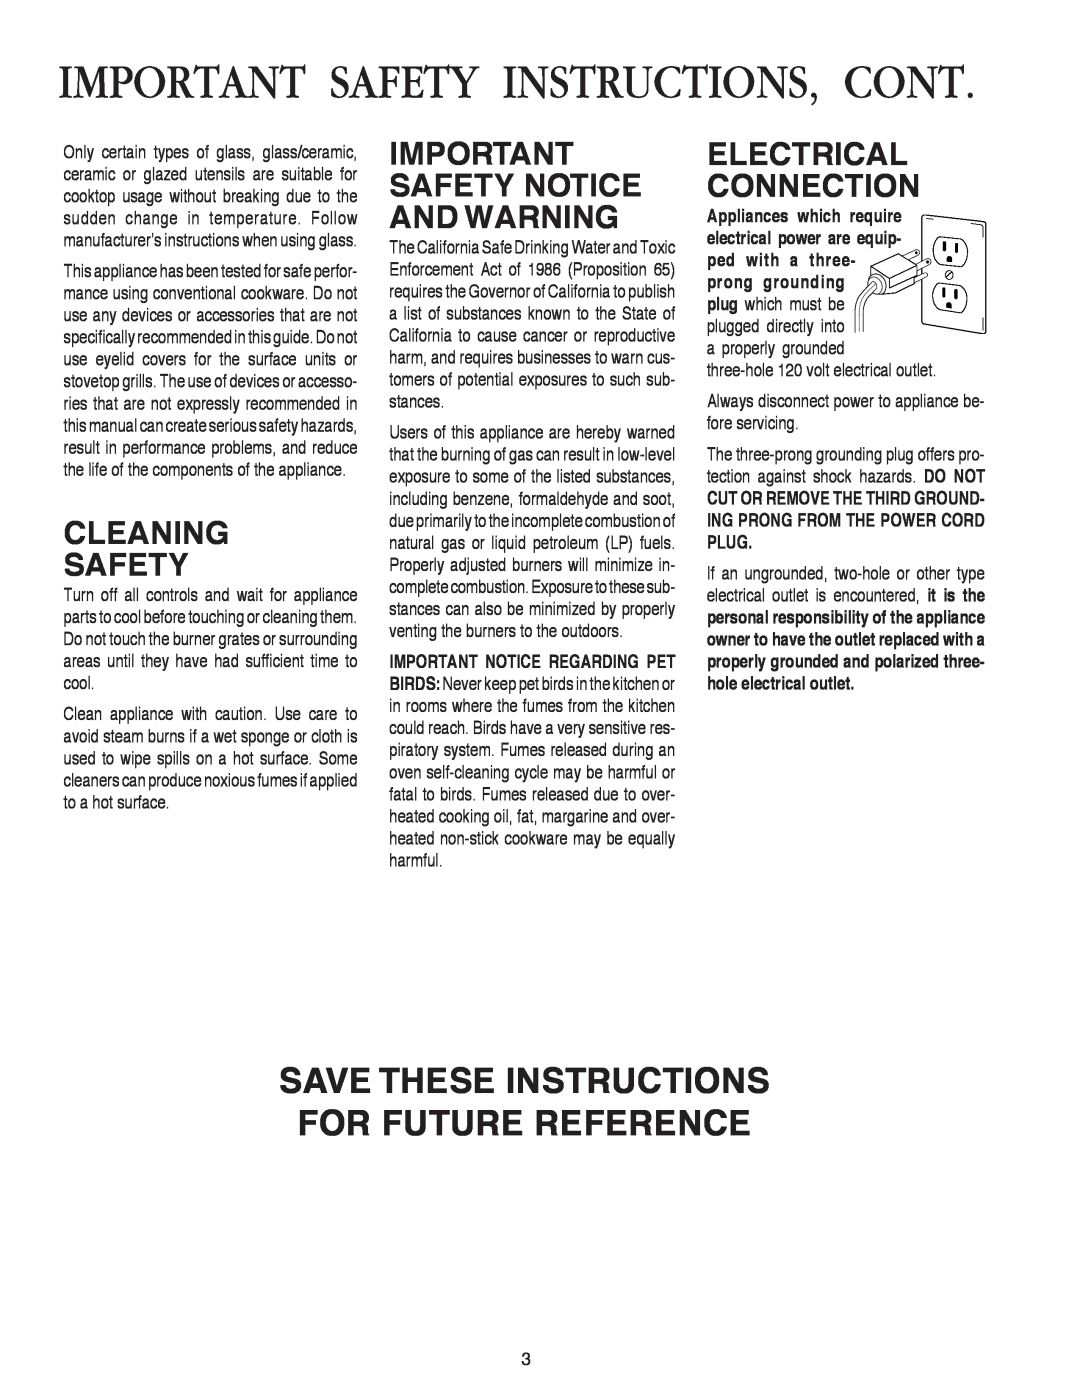 Amana AKS3640, AKS3040 Important Safety Instructions, Cont, Save These Instructions For Future Reference, Cleaning Safety 